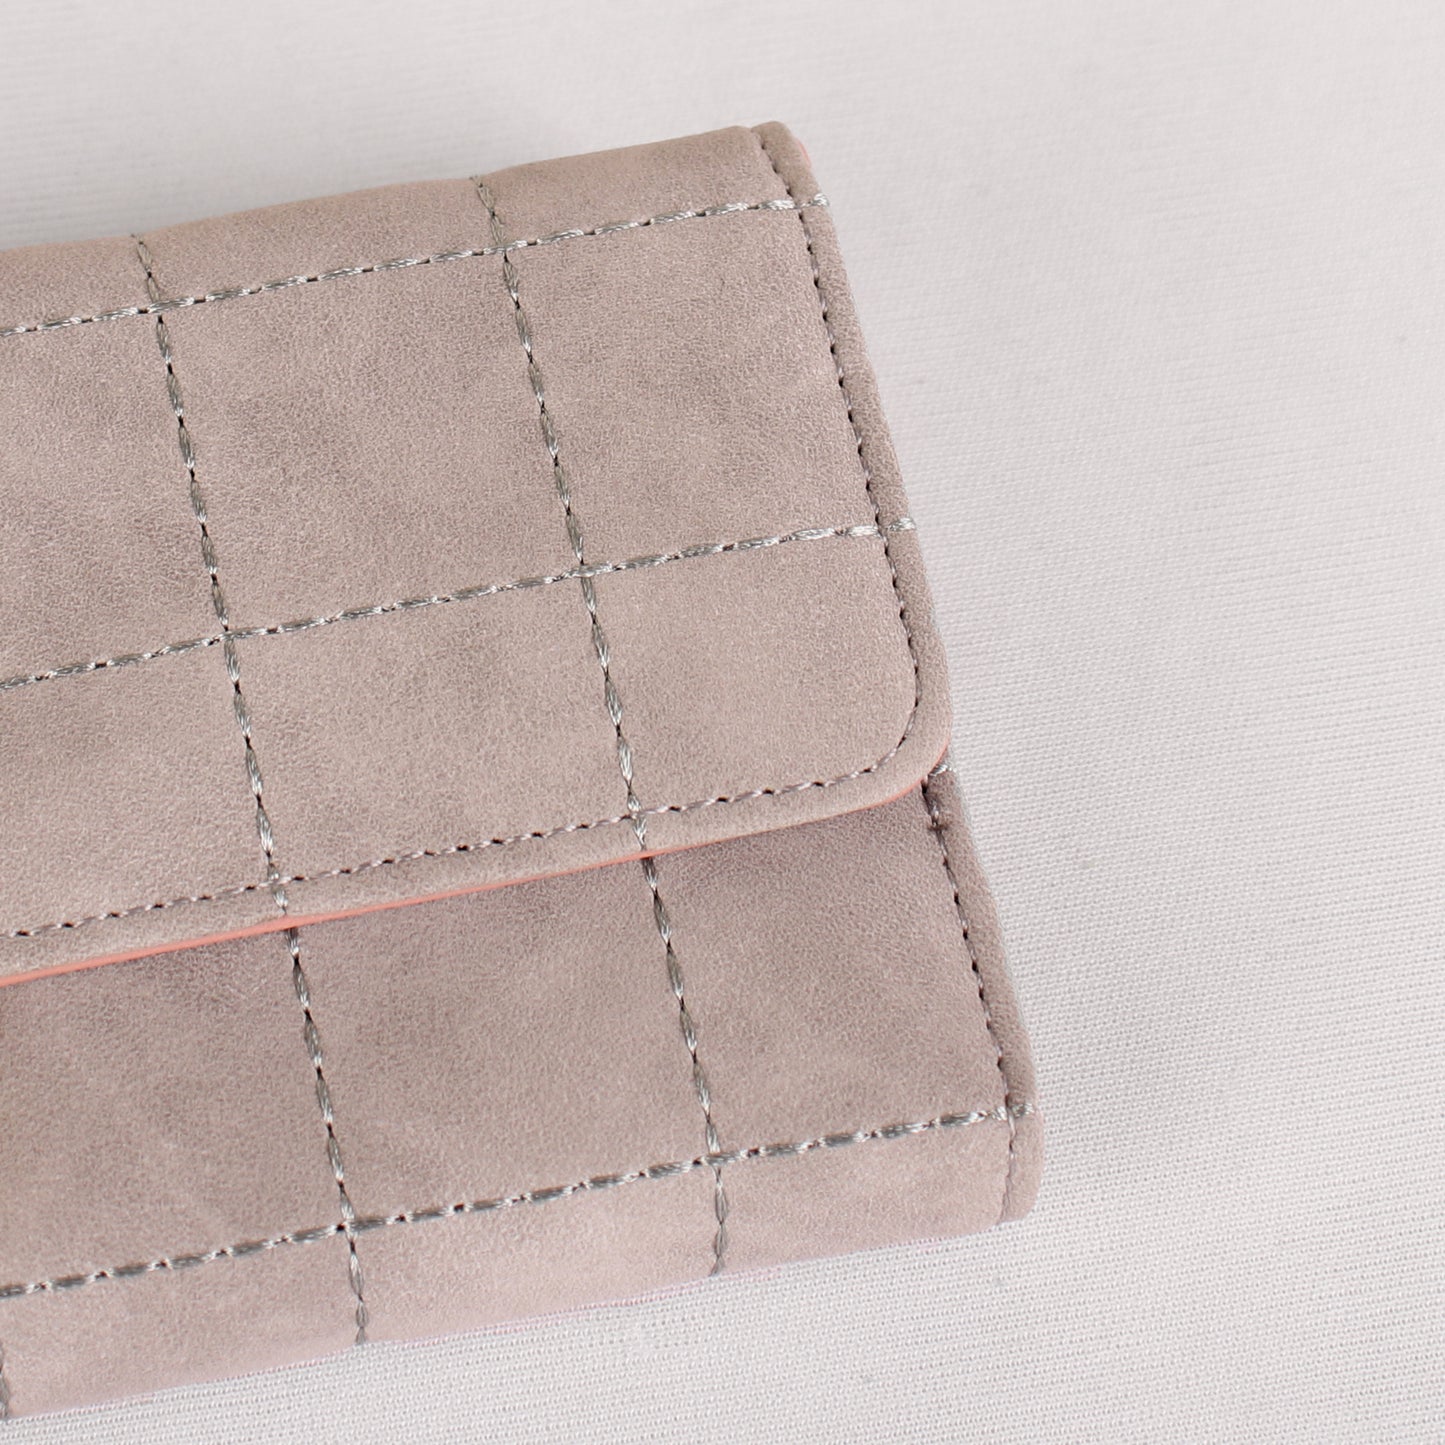 The Boxy Clamped Wallet in Light Grey